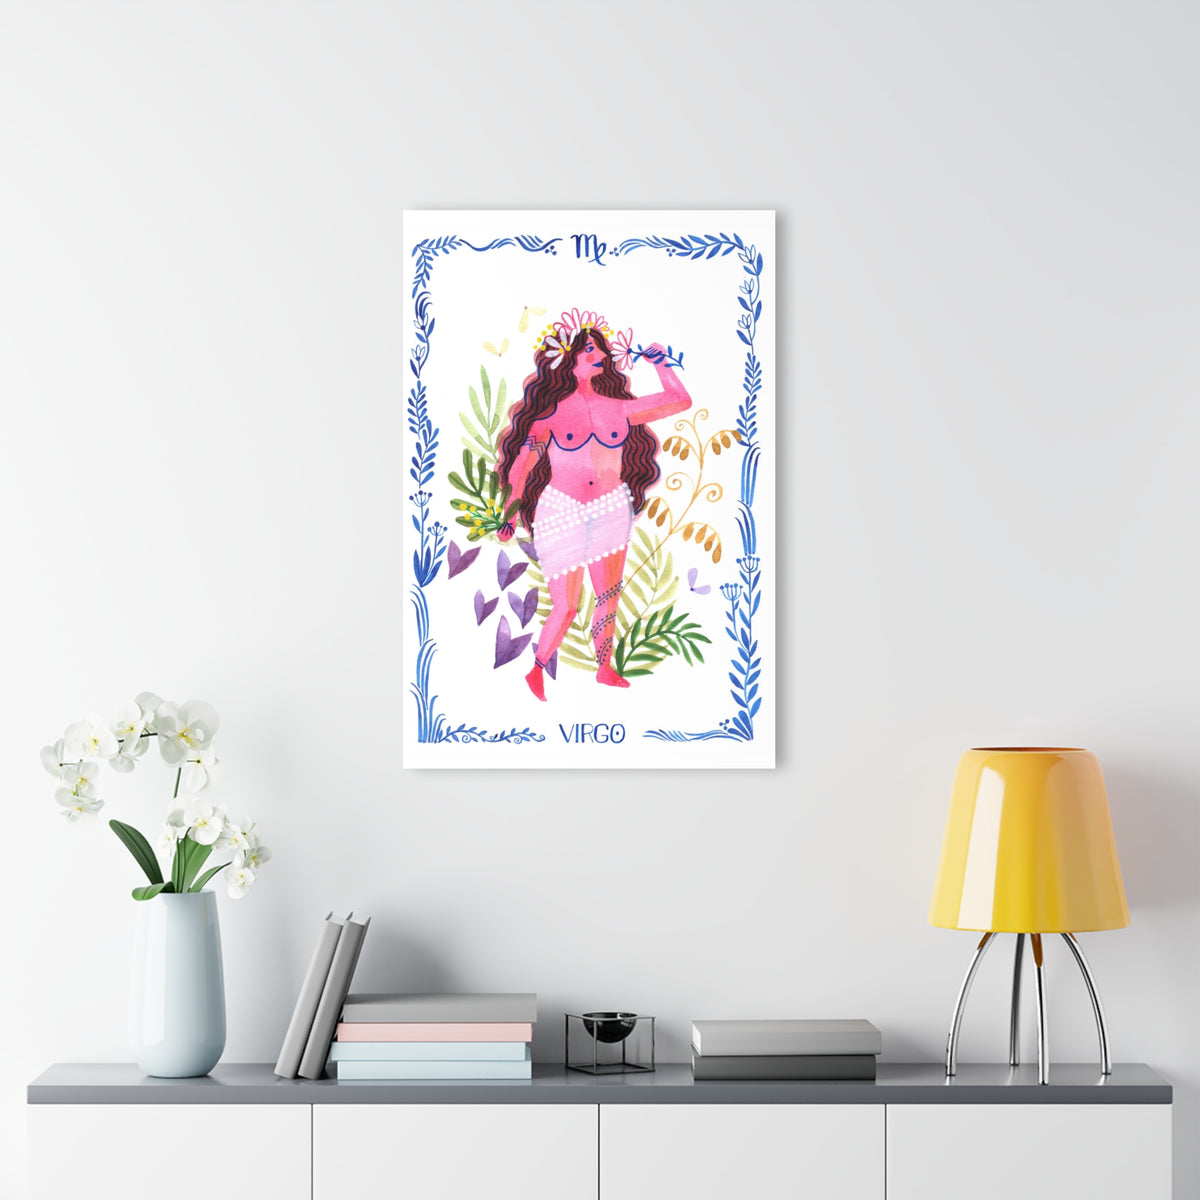 Virgo's Vision: Acrylic Print with French Cleat Hanging